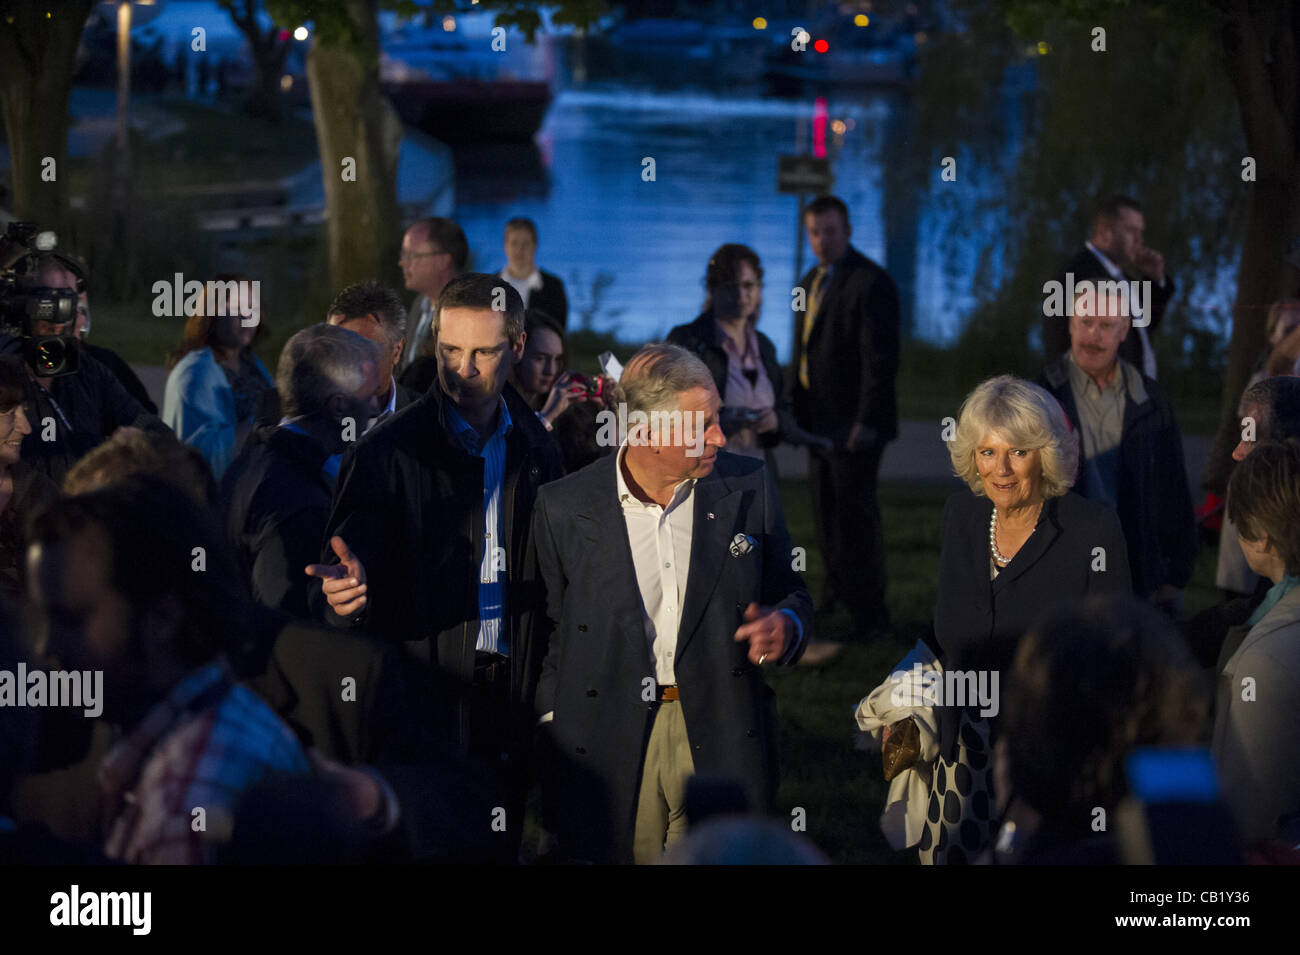 May 21, 2012 - Toronto, Ontario, Canada - Ontario Premier DALTON MCGUINTY, PRINCE CHARLES and his wife CAMILLA, Duchess of Cornwall  arrived to watch the Victoria Day fireworks in Toronto. (Credit Image: © Igor Vidyashev/ZUMAPRESS.com) Stock Photo